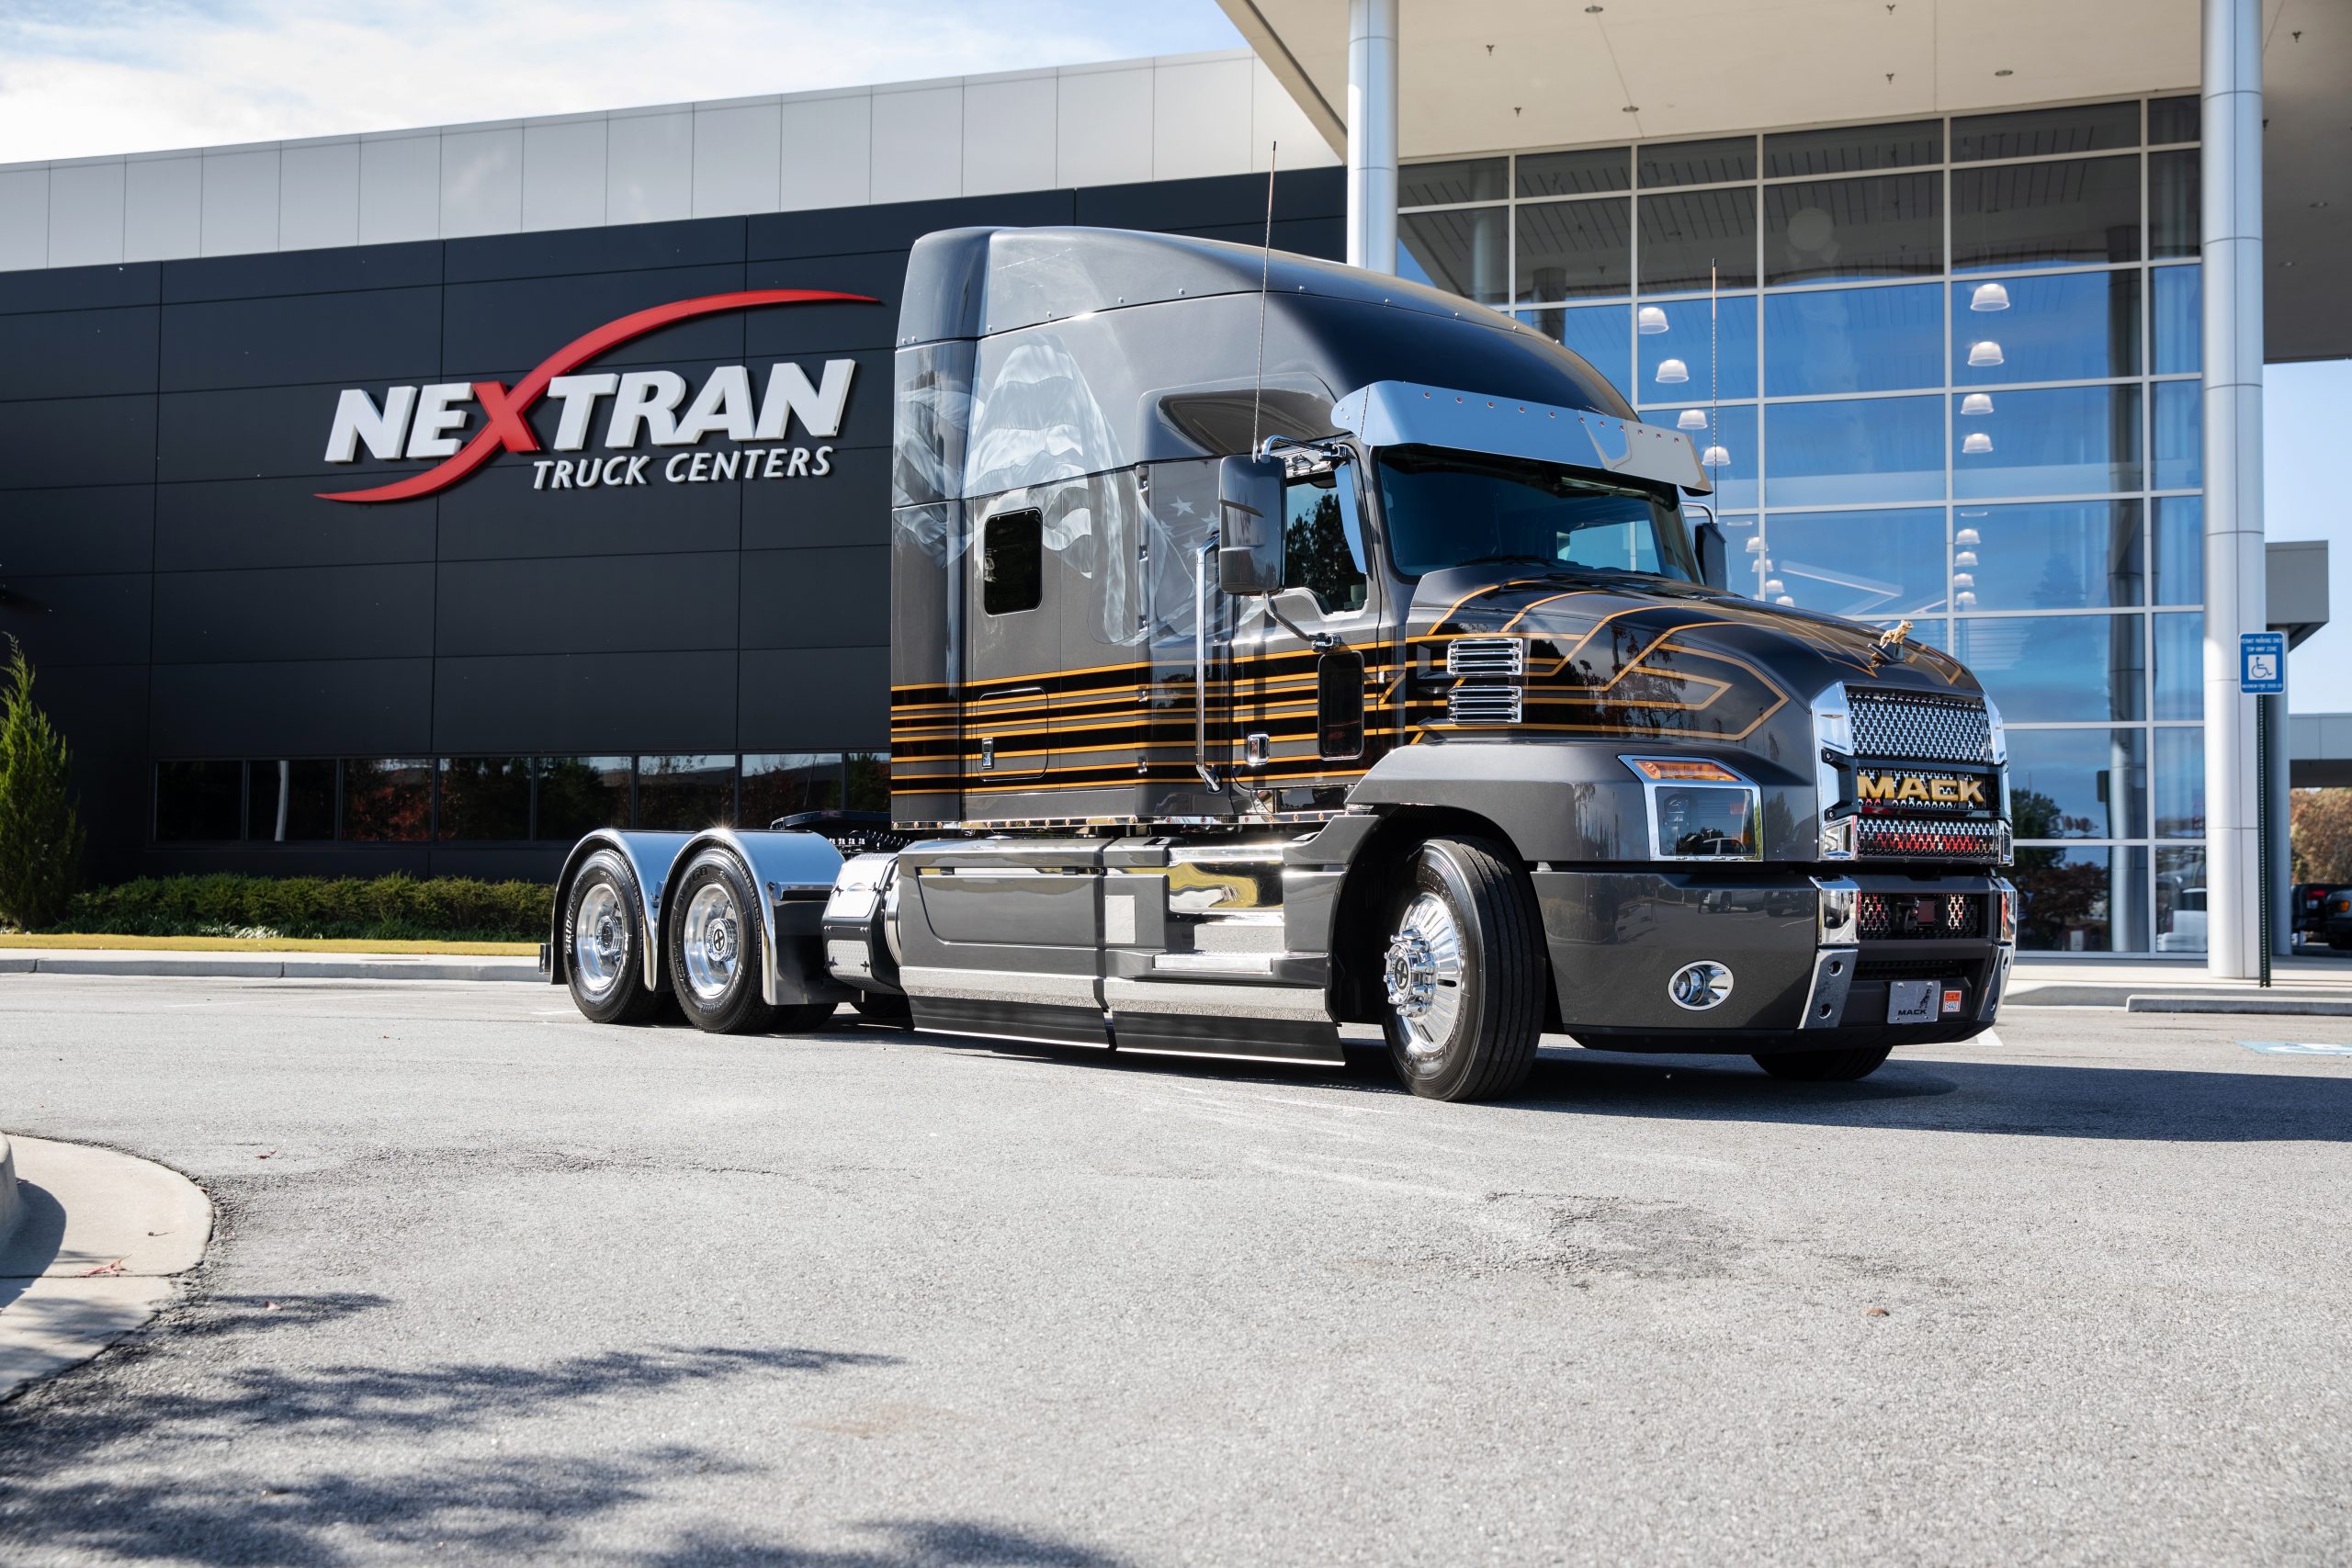 How to Buy a Mack Truck: Pick the Best Model for Your Fleet